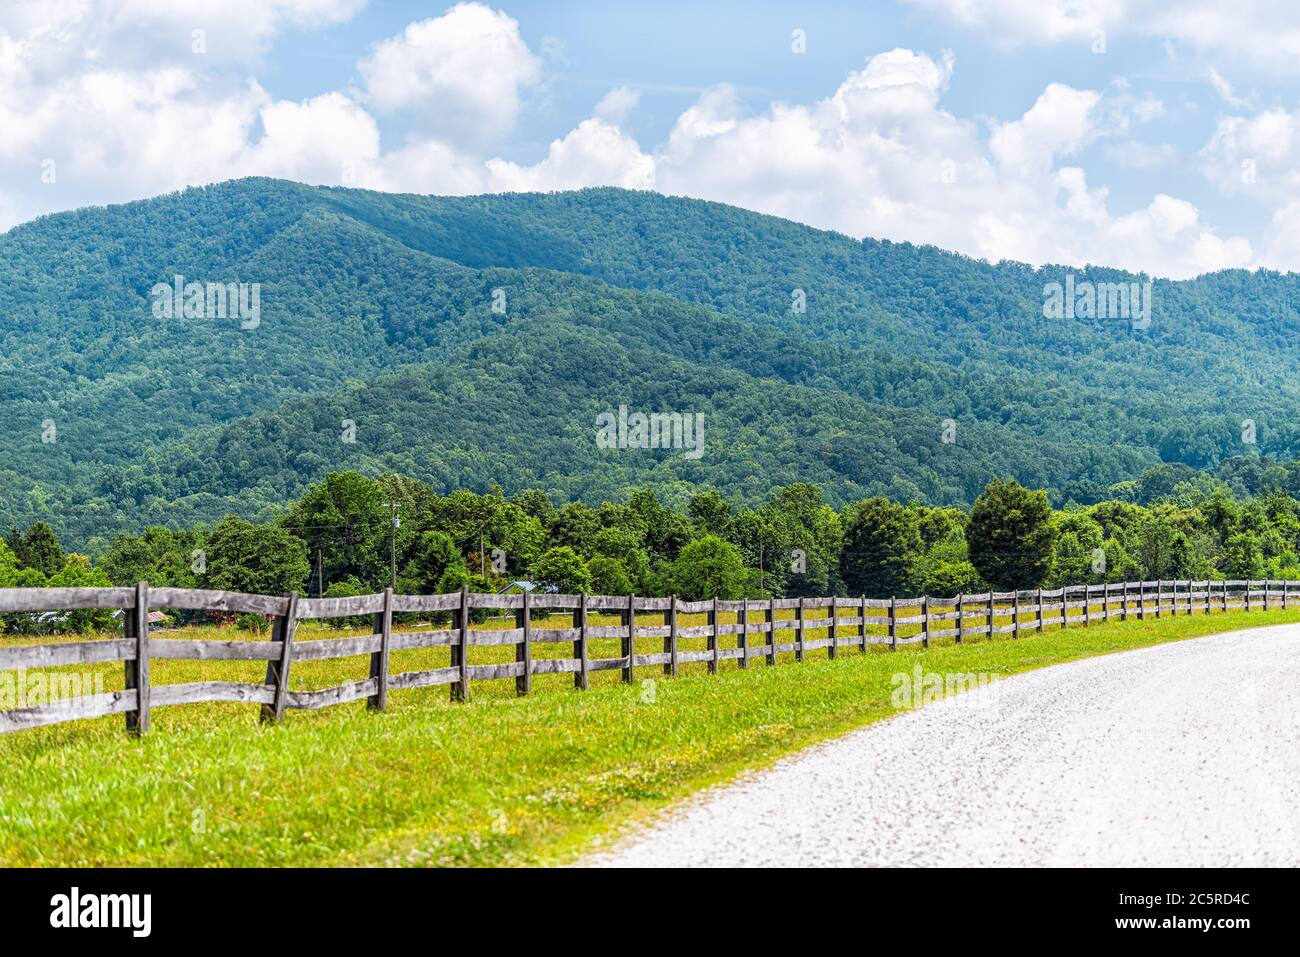 Farm road wooden fence in Roseland, Virginia near Blue Ridge parkway mountains in summer with idyllic rural landscape countryside in Nelson County Stock Photo